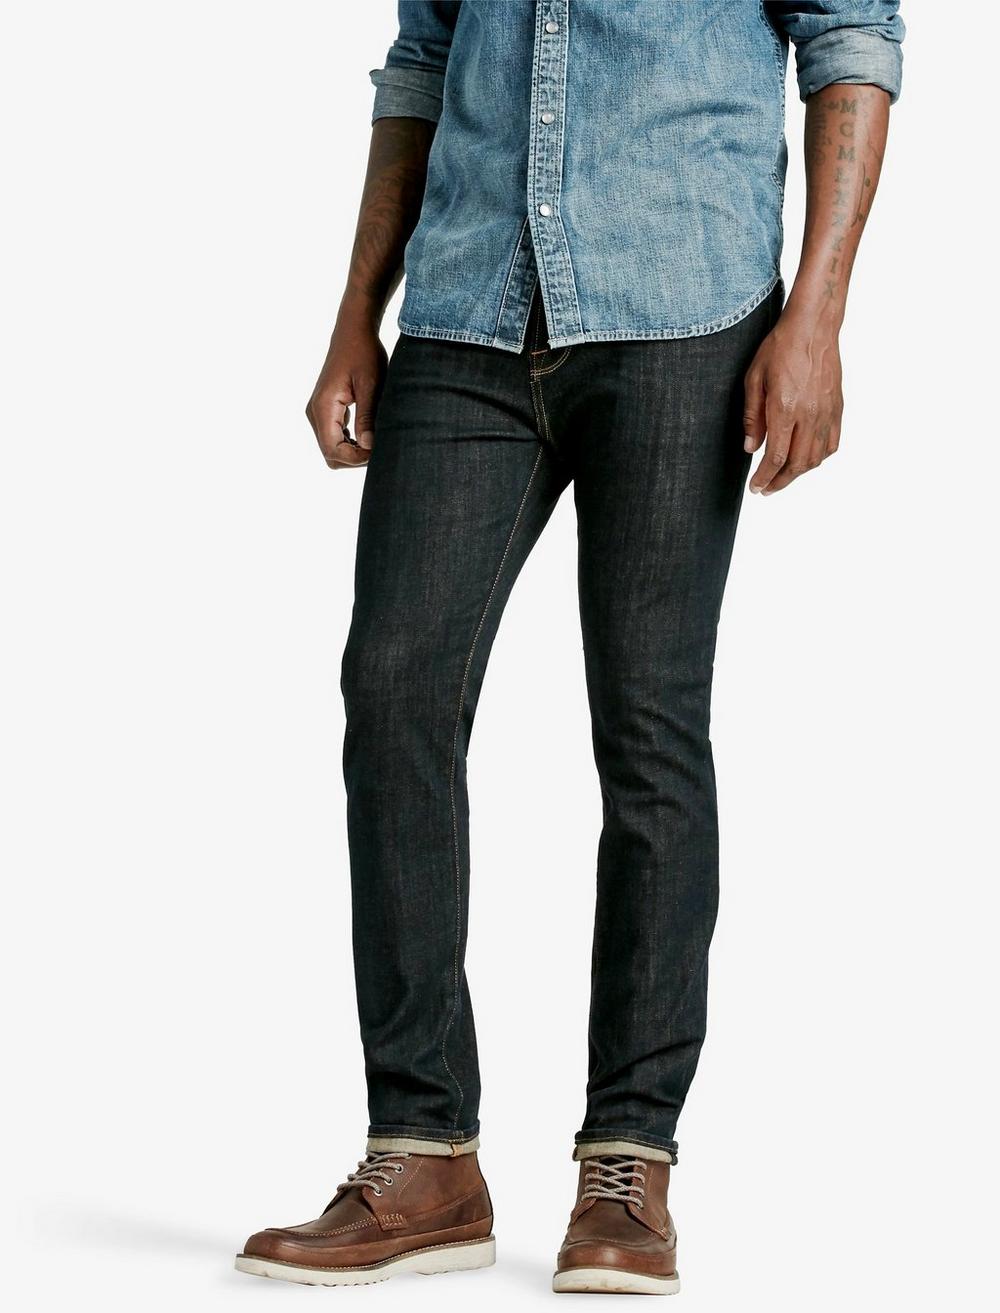 76 SLOUCH SKINNY JEAN, image 1